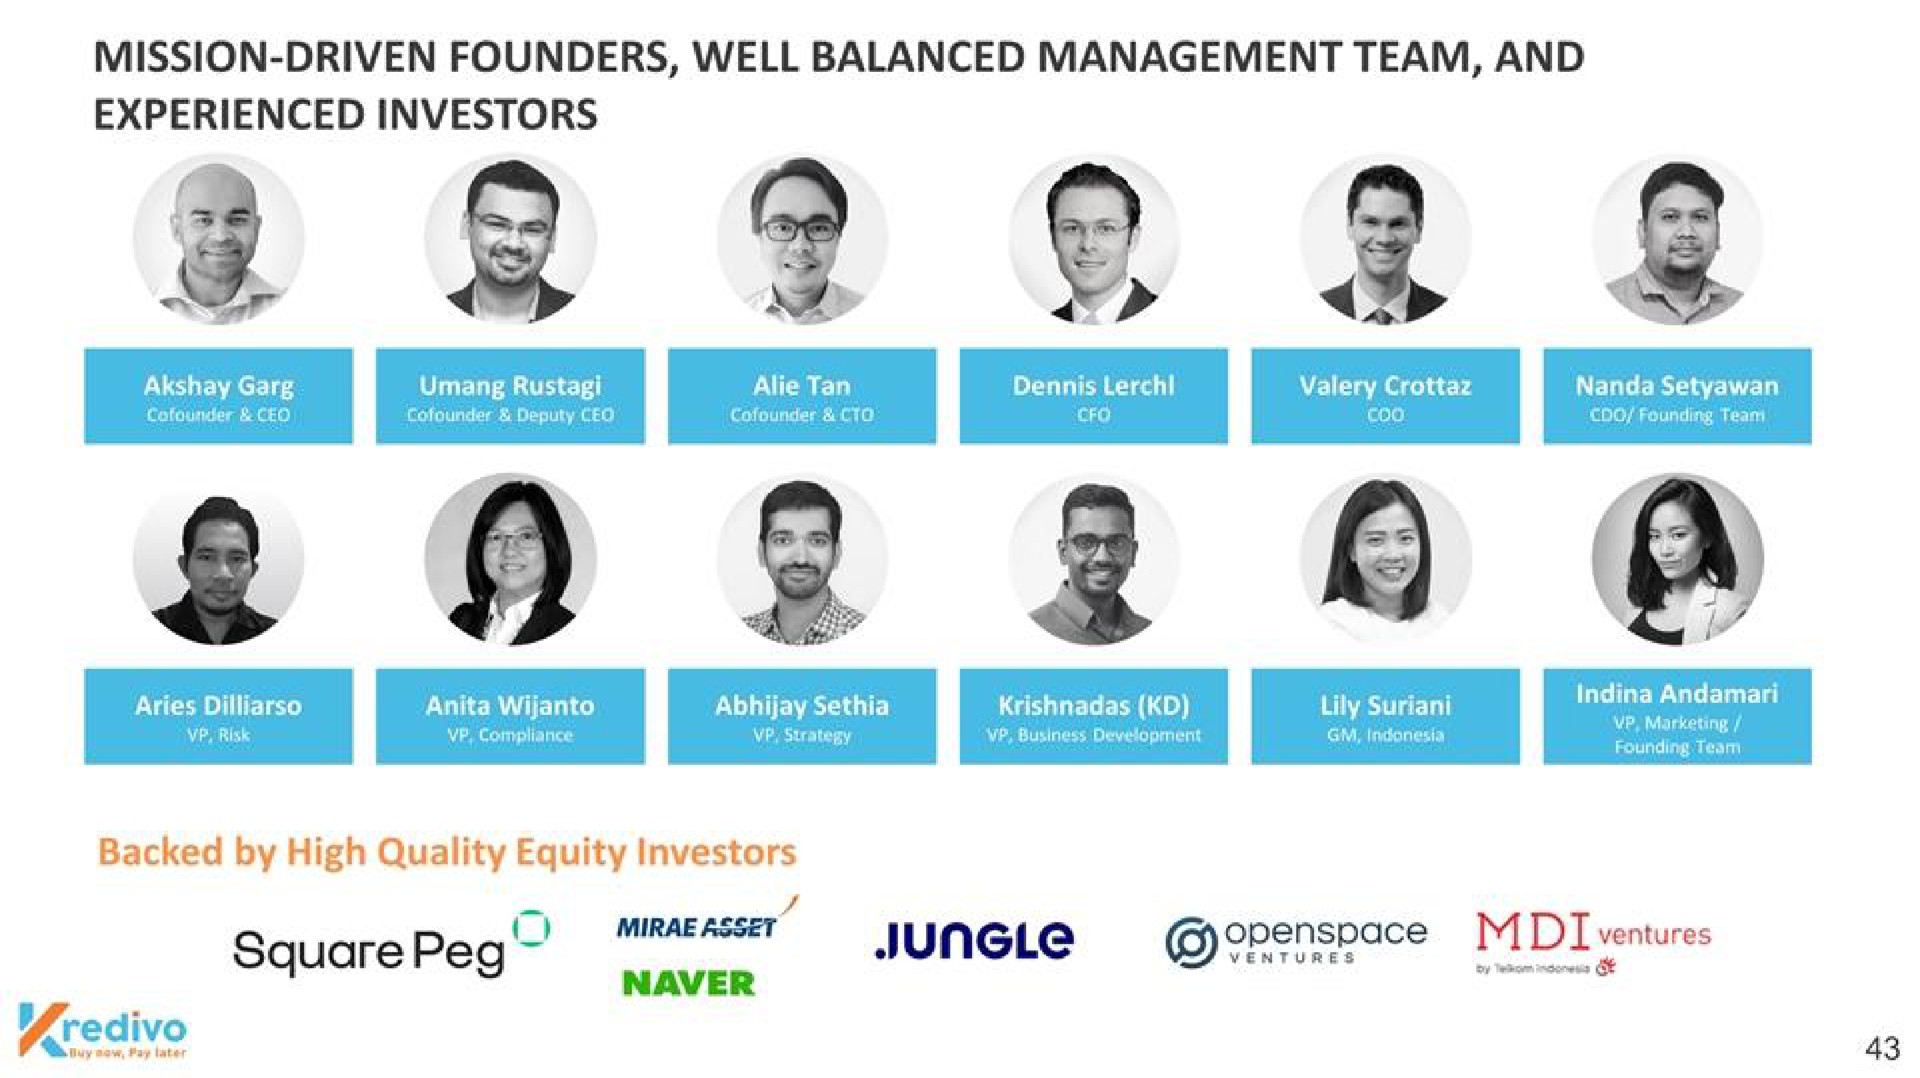 mission driven founders well balanced management team and experienced investors reset teat bile square peg aid jungle | Kredivo